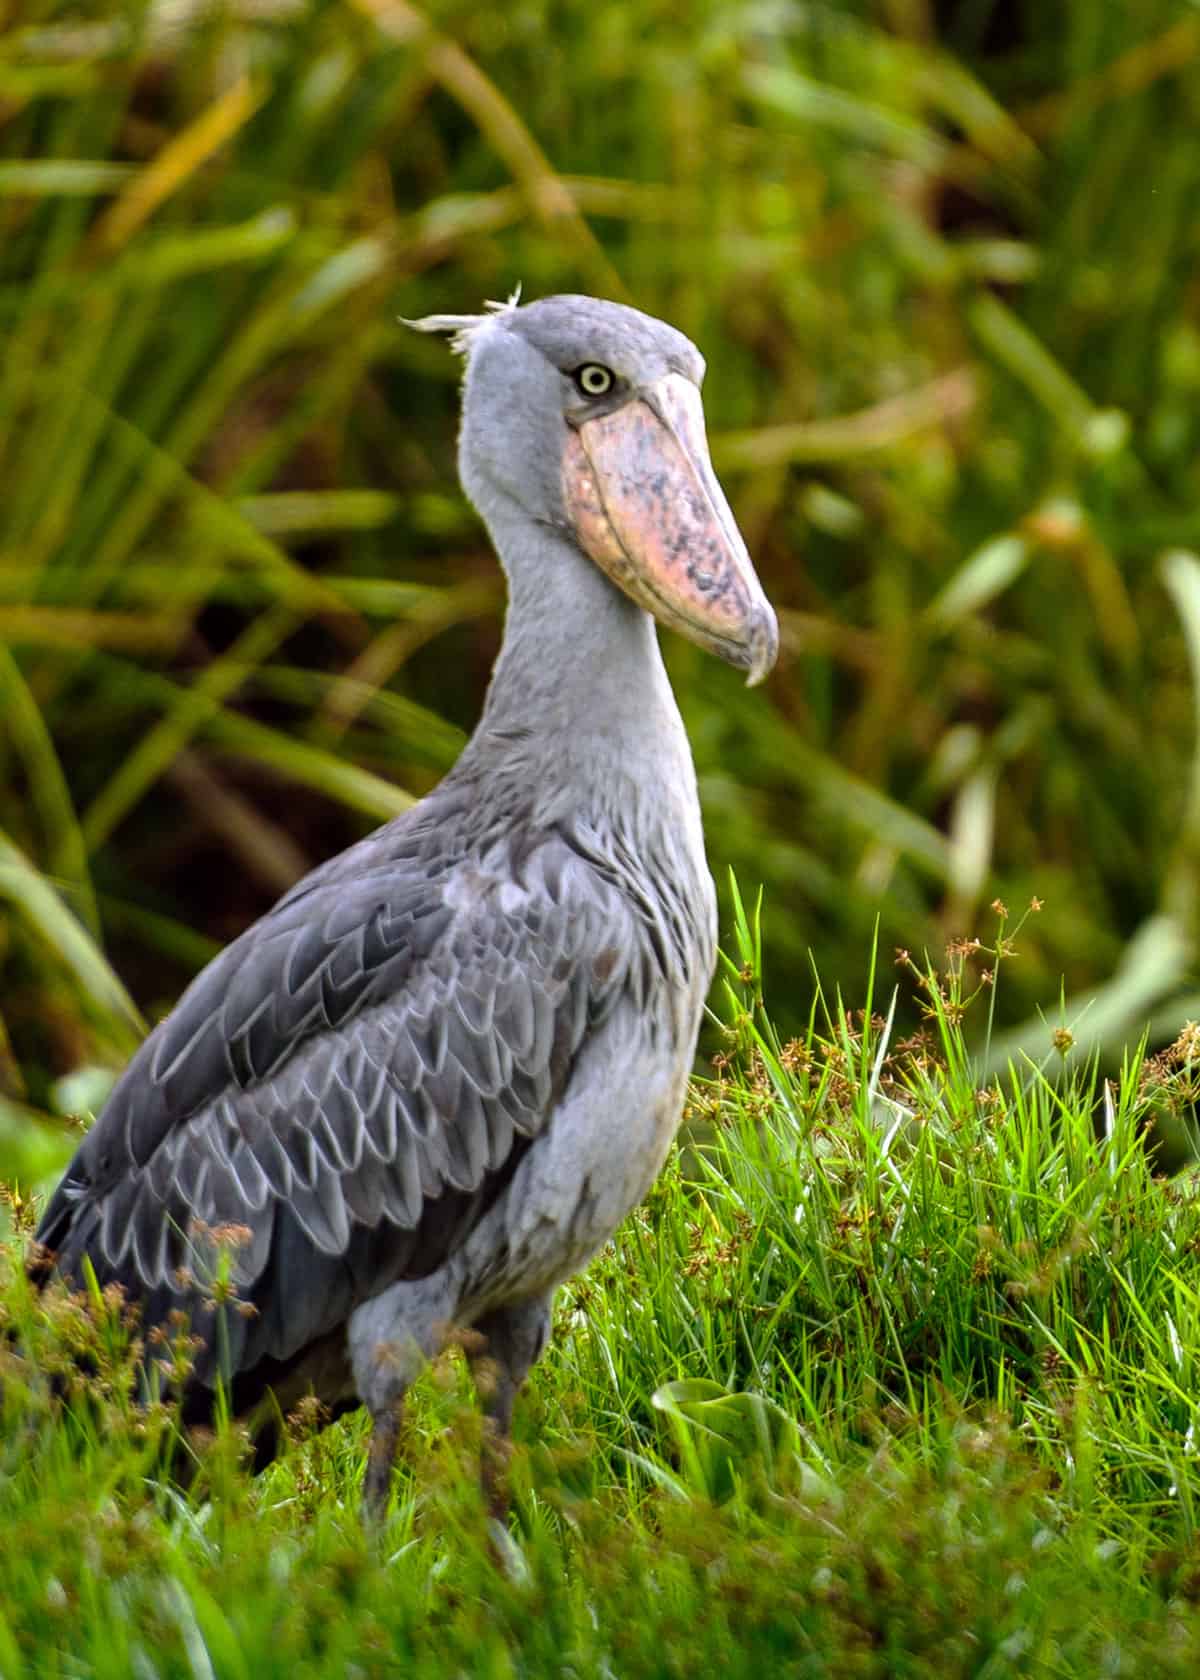 How tall is the shoebill?